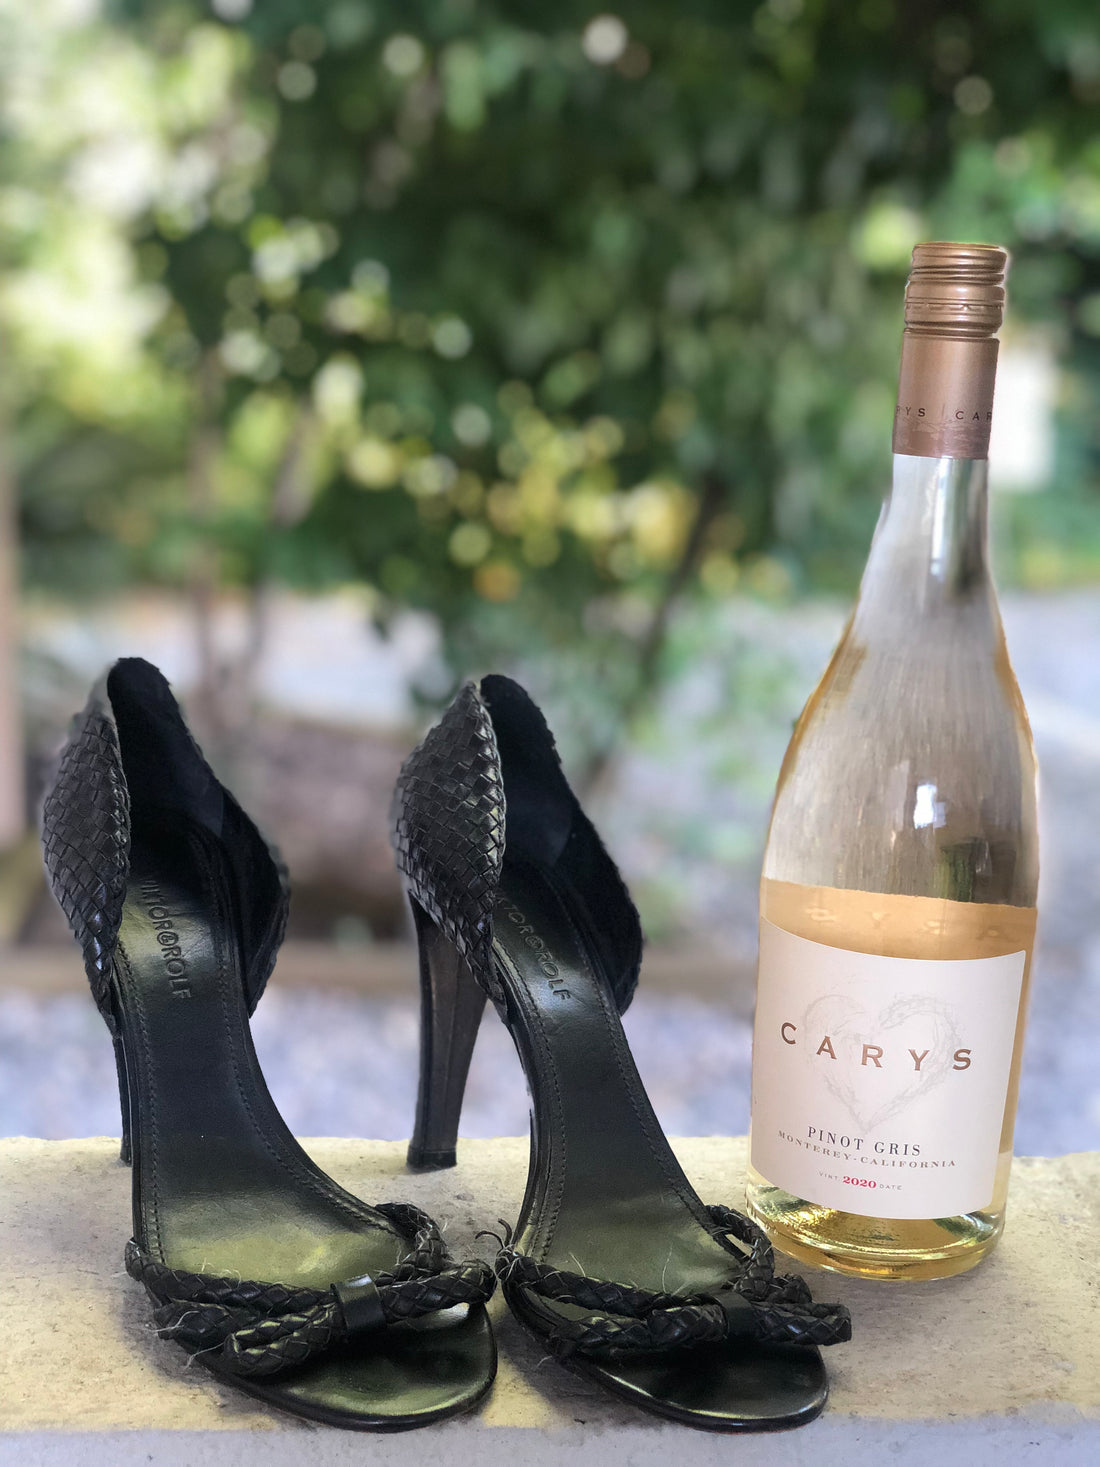 Viktor & Rolf Sandals and Cary Pinot Gris